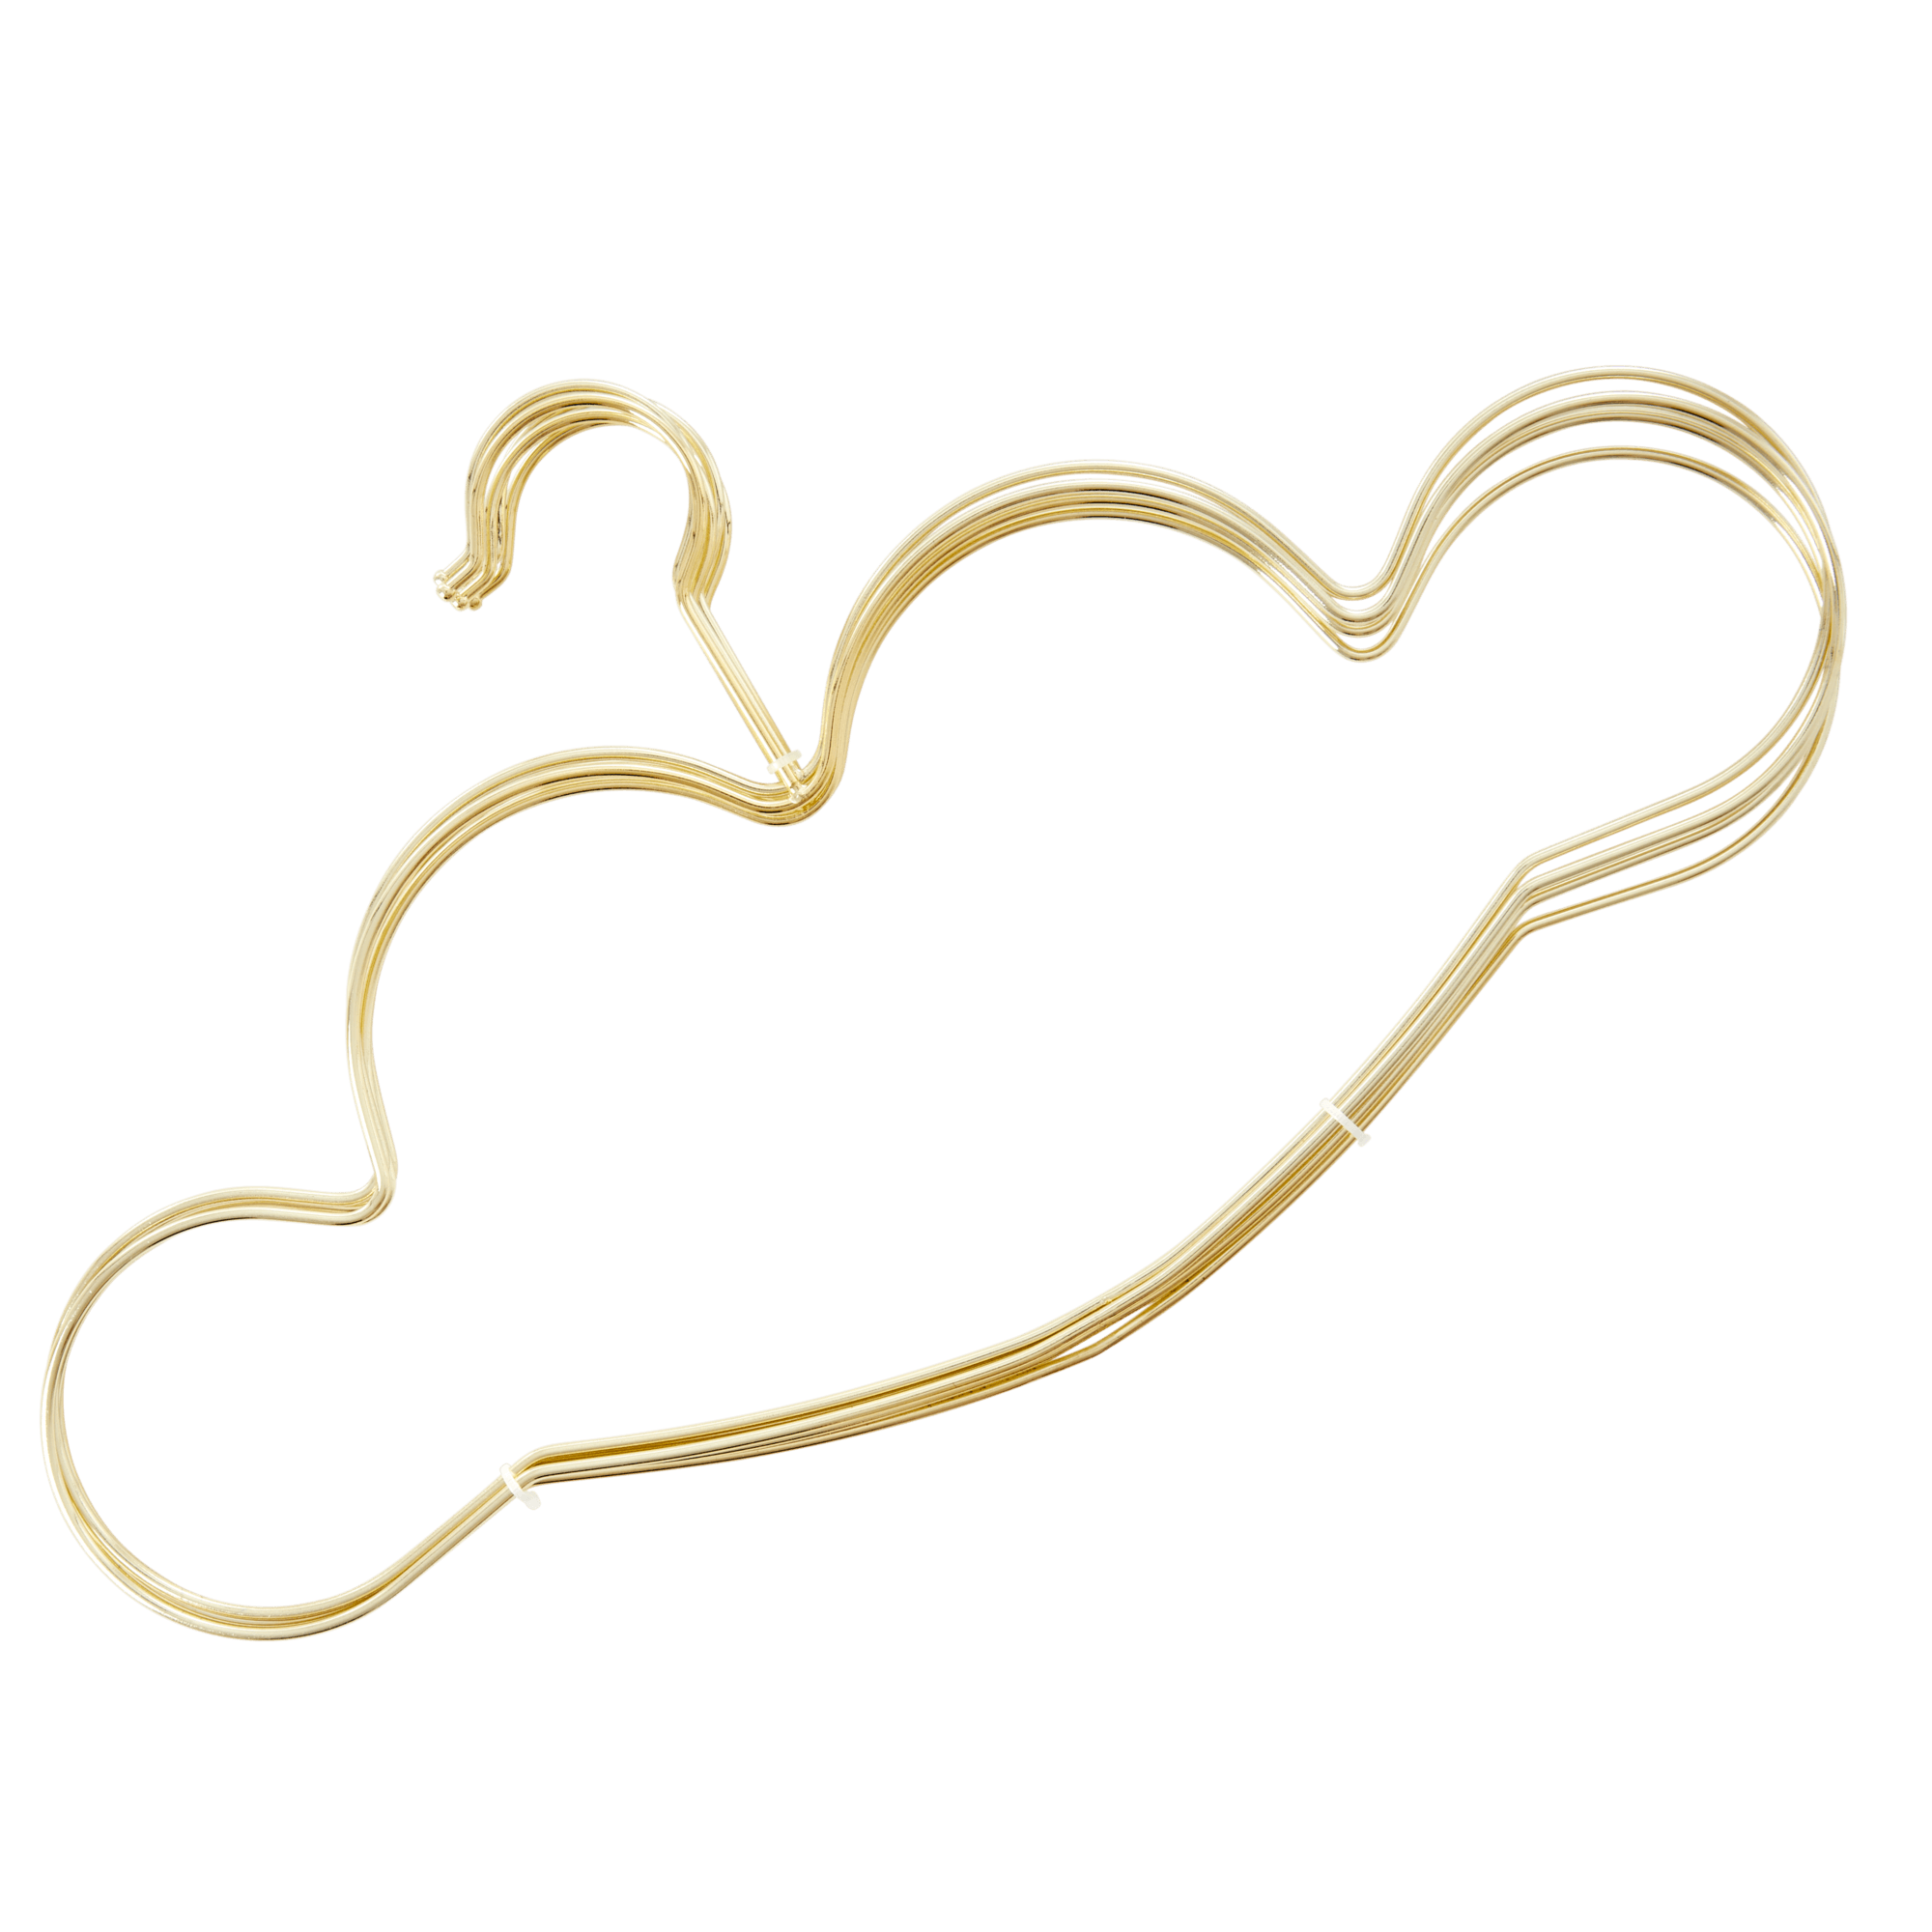 Rice - Metal Cloud Shaped Clothes Hangers in Gold - Set of 5 - Large